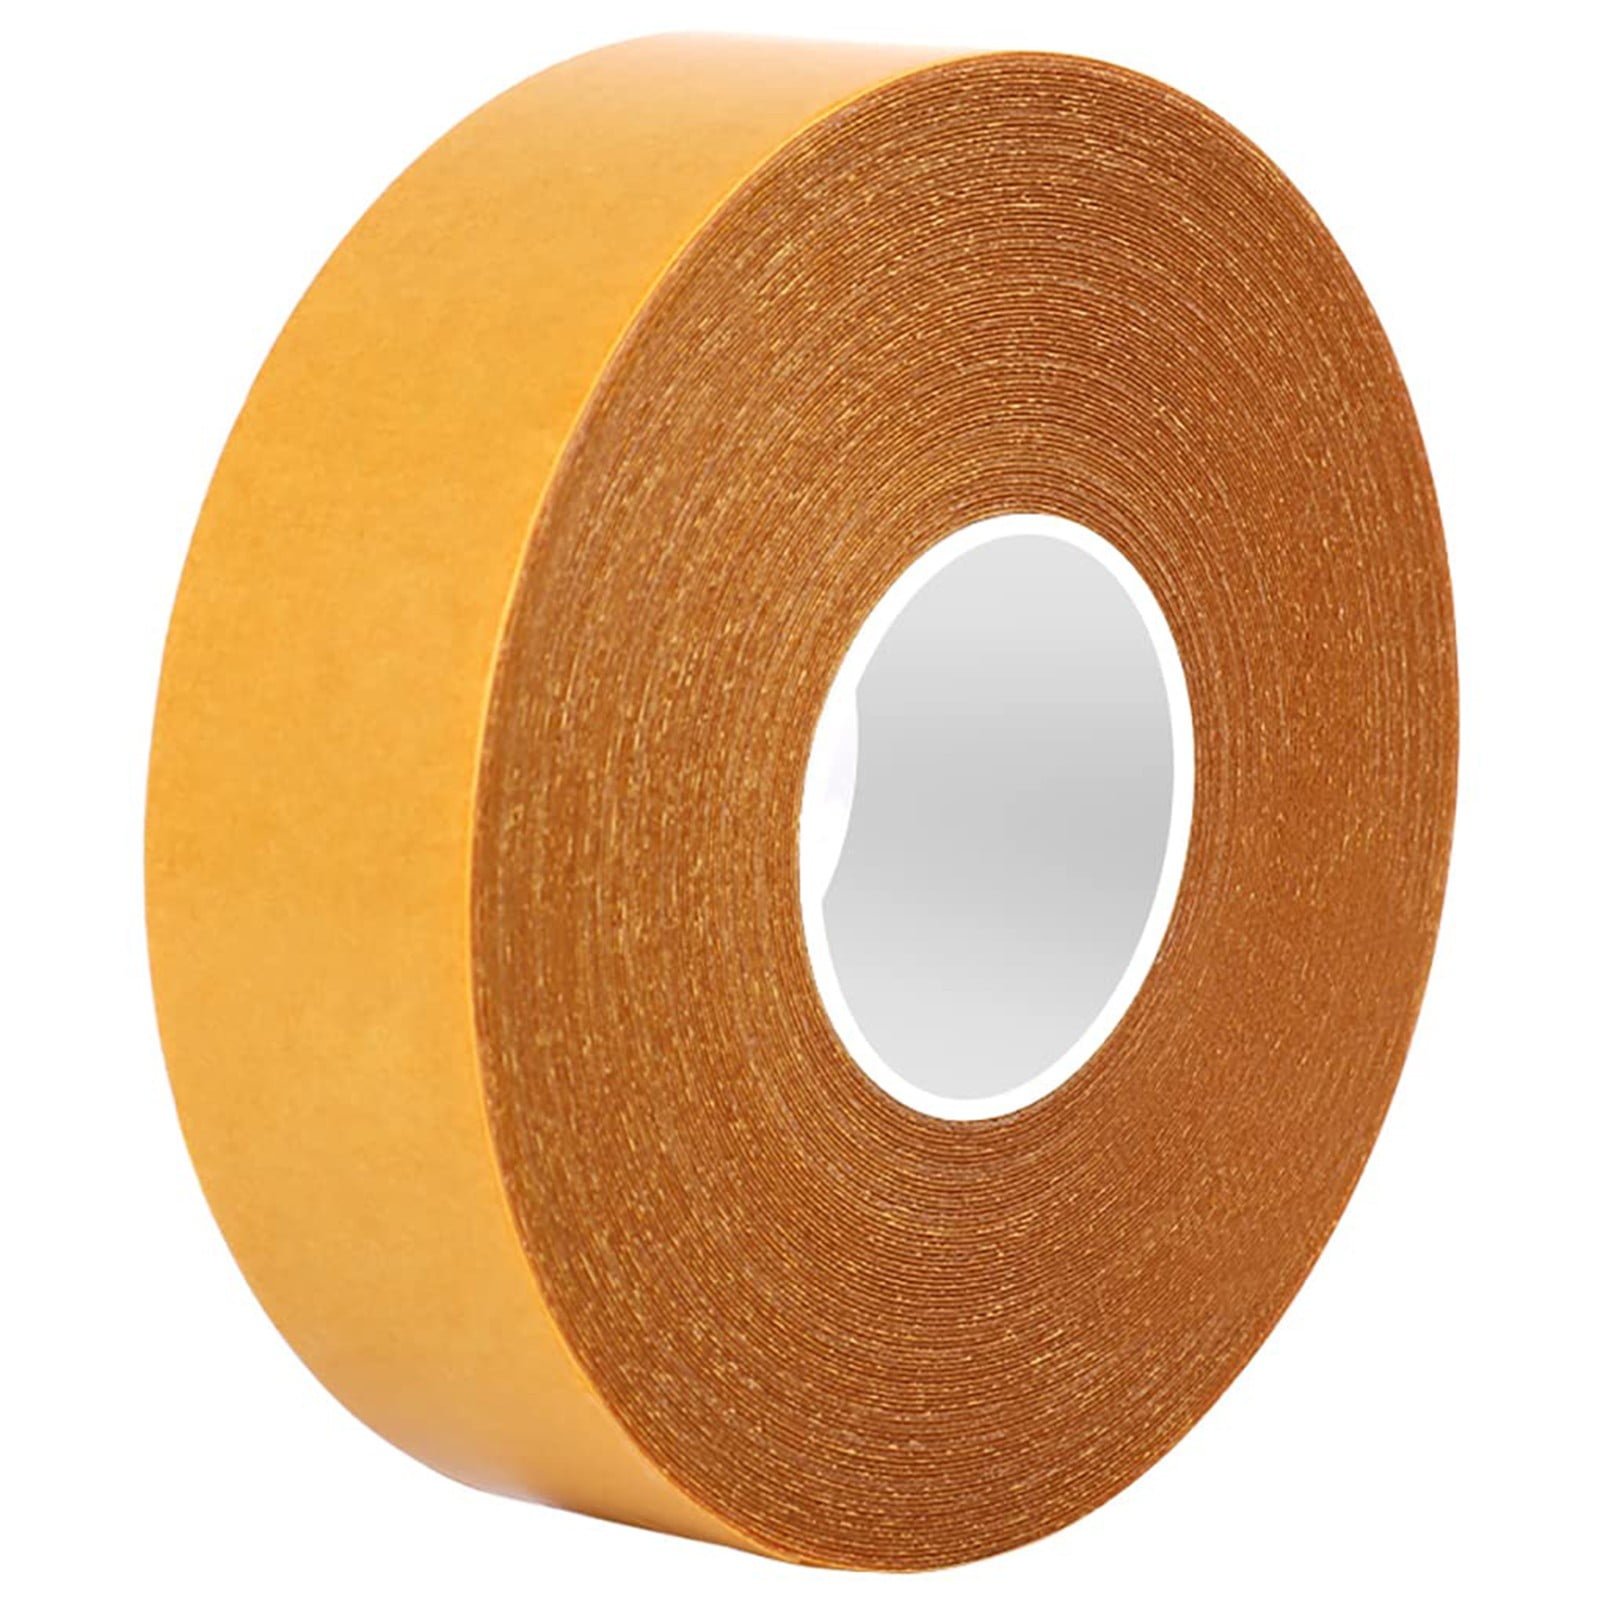 SINGER Instant Bond Double-Sided Fabric Tape-.75X15